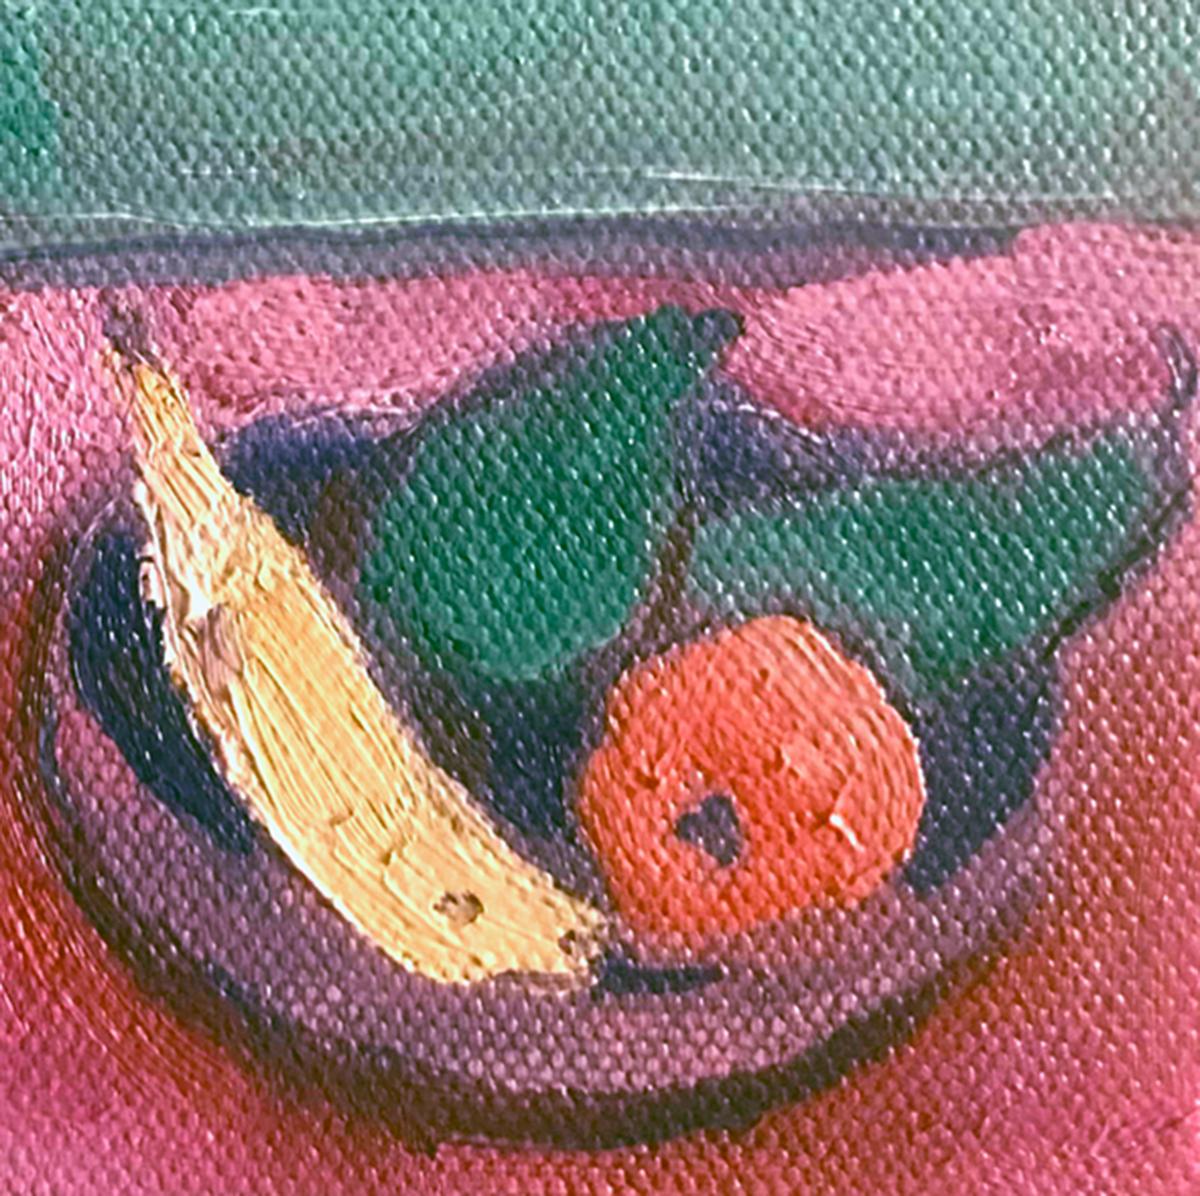 Still life with Jug is an Original Painting by Eleanor Woolley. Painted in her Gloucestershire Studio this painting depicts a little rectangular jug, a maquette of an acrobat on their head and a bowl of fruit. Items selected by the Artists to make